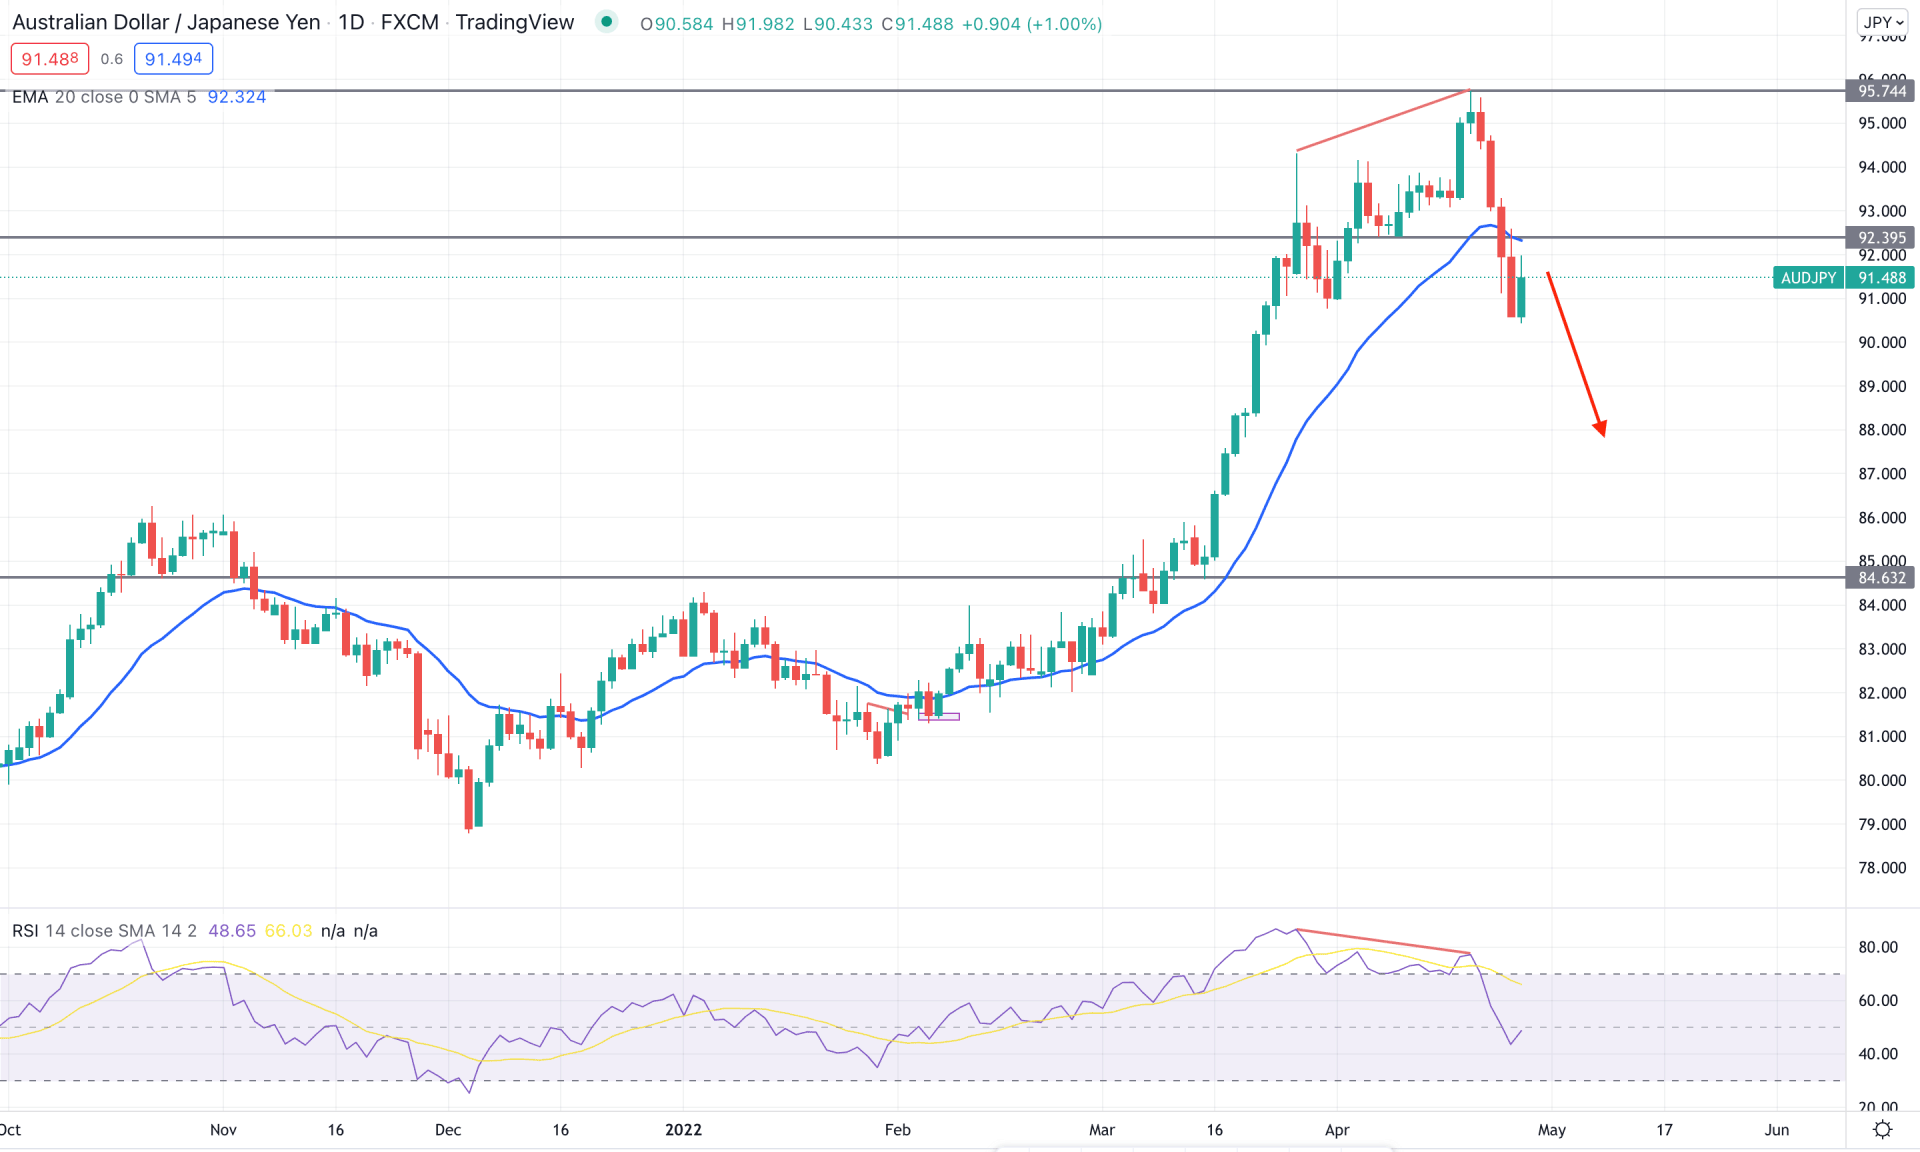 AUDJPY Daily Technical Analysis 27th April 2022